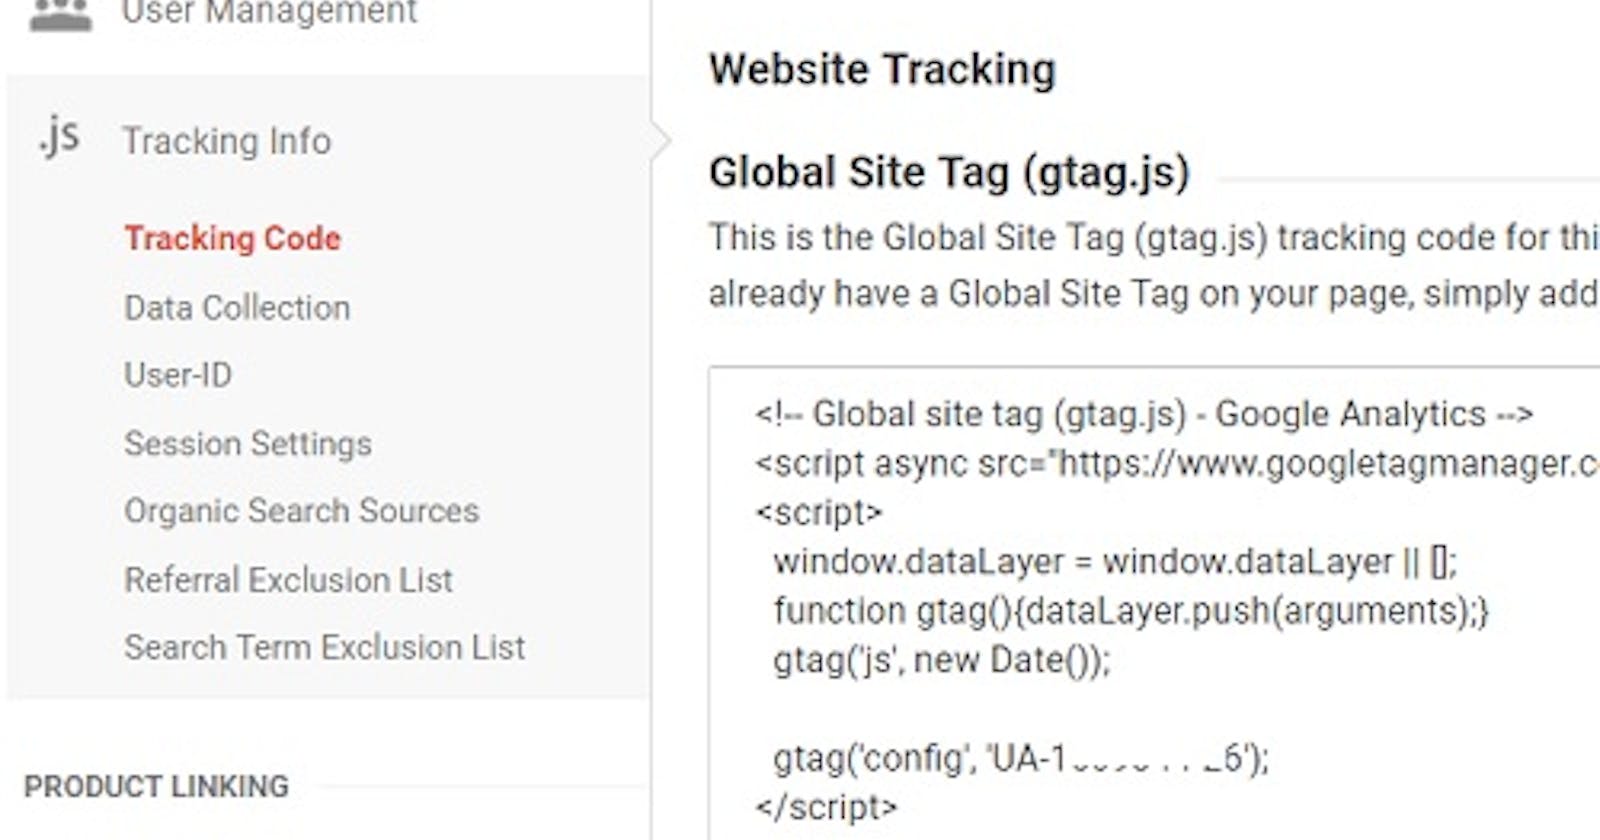 Google Tag Manager (GTM) or Global Site Tag (gtag.js)?